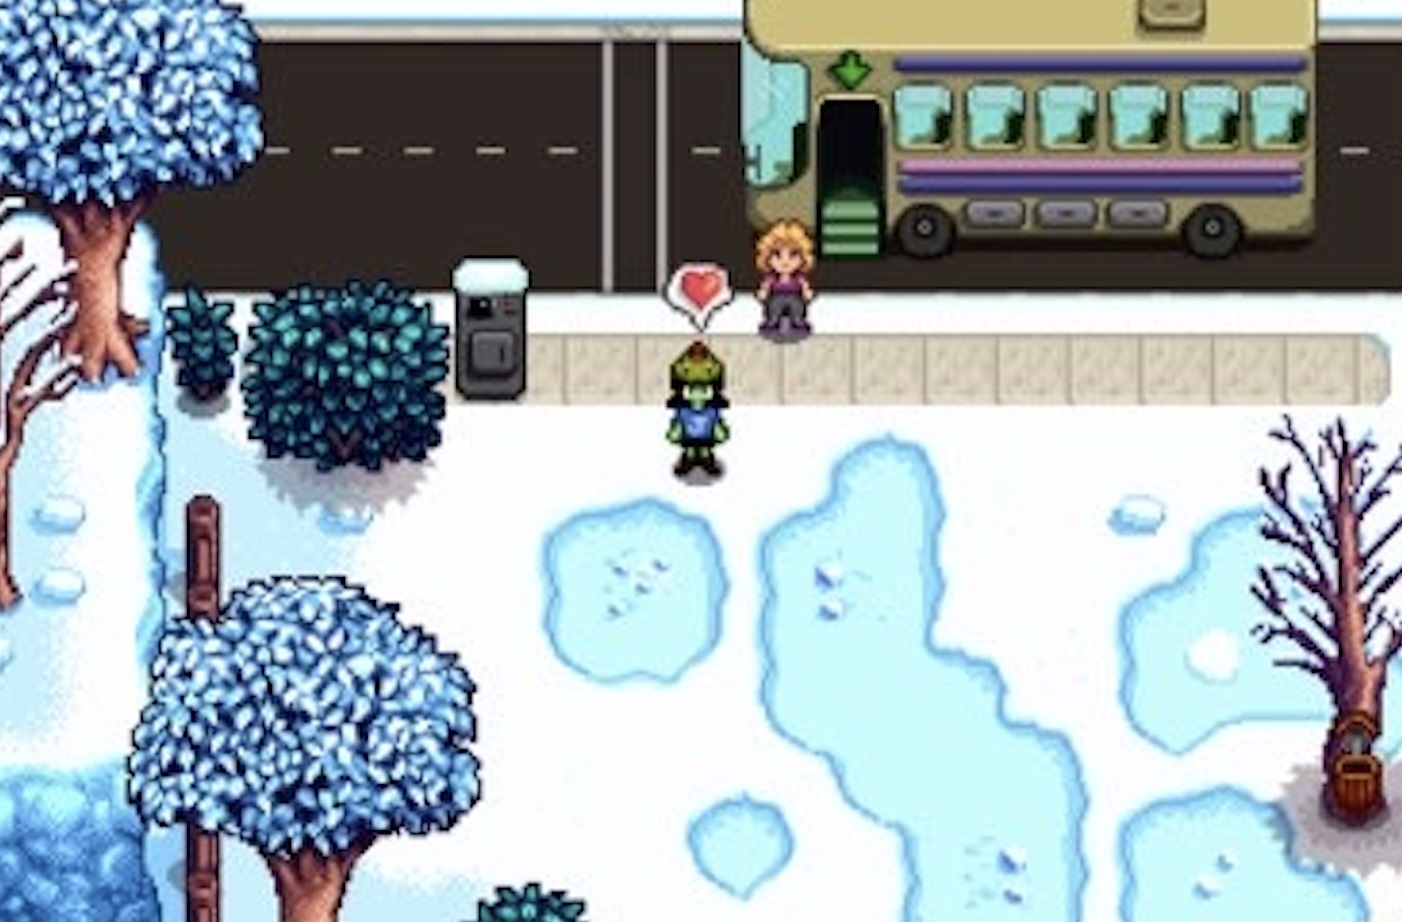 Getting on the repaired bus to Calico Desert in Stardew Valley